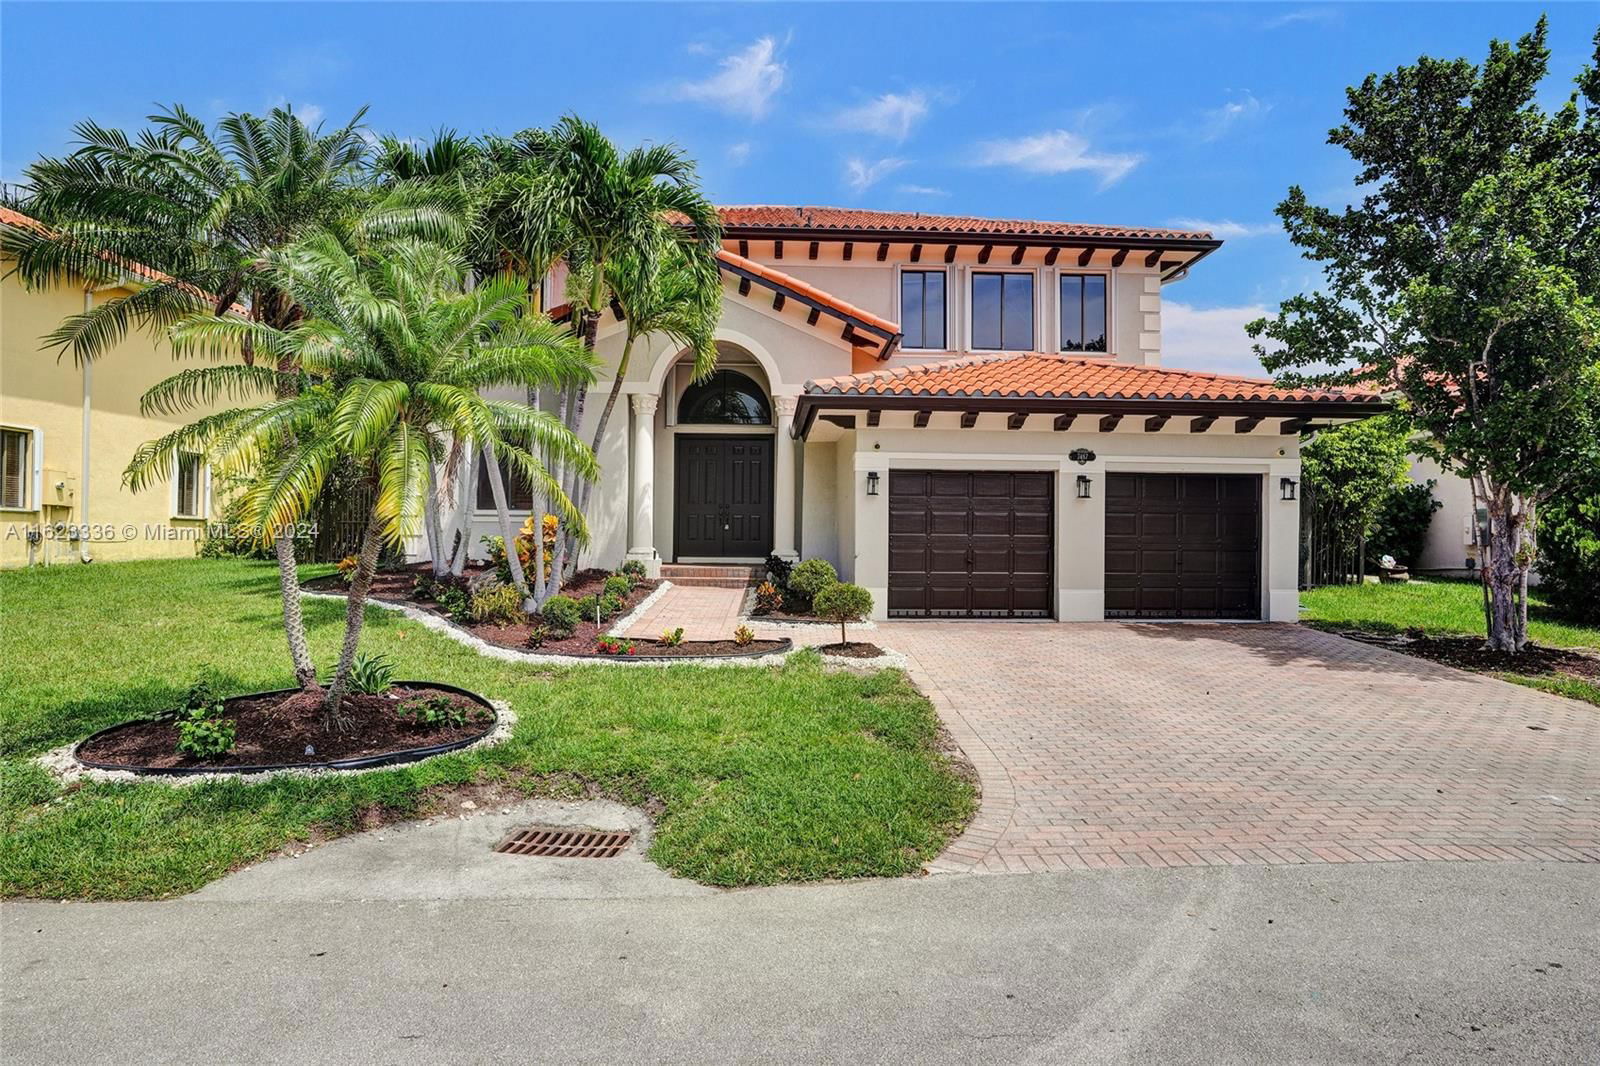 Real estate property located at 7467 189th St, Miami-Dade County, CUTLER CAY, Cutler Bay, FL